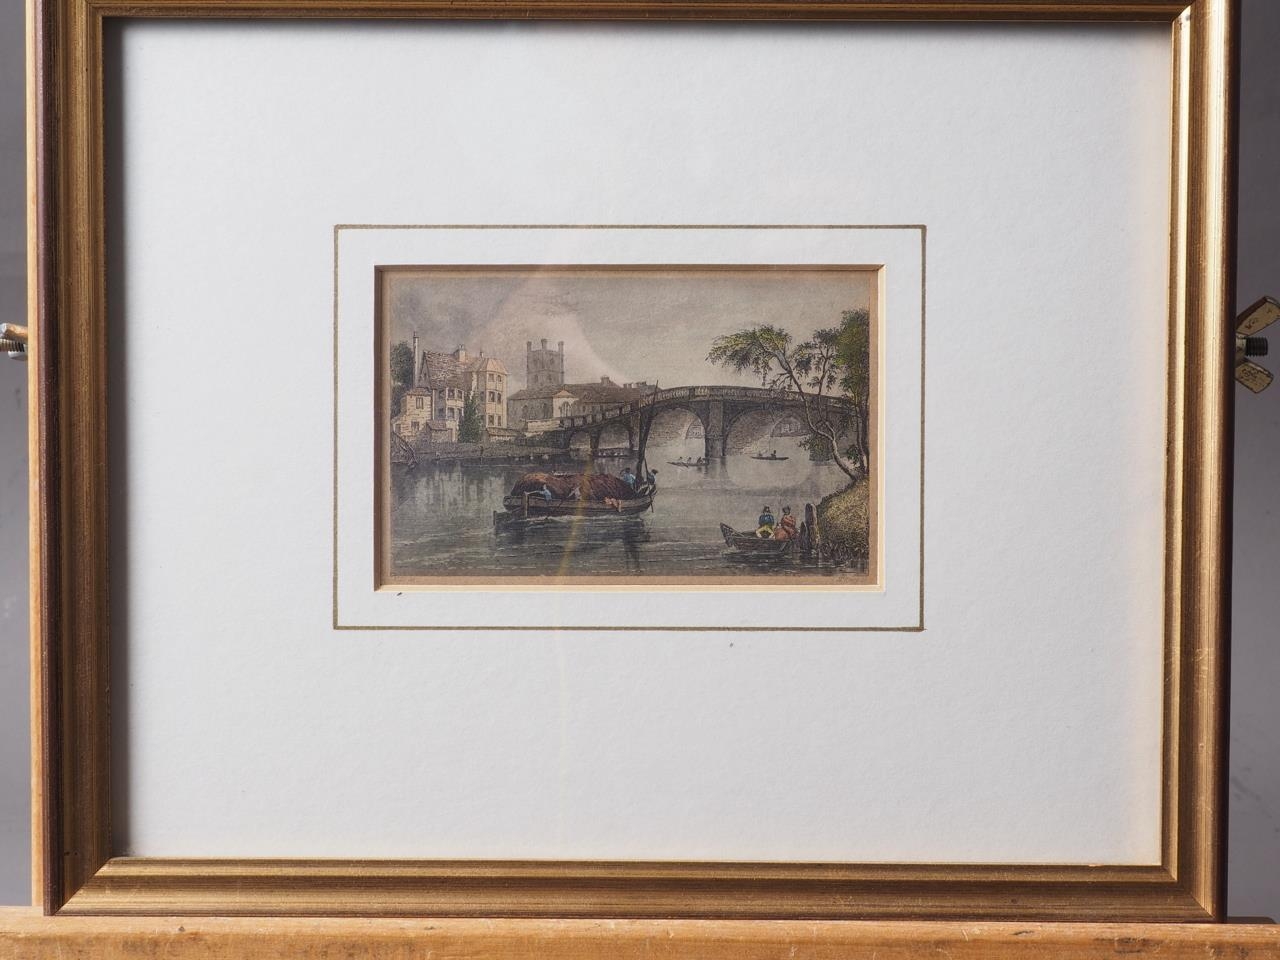 W P Mundy: a limited edition print, swan upping, 13/450, in white painted strip frame, a print of - Image 3 of 4